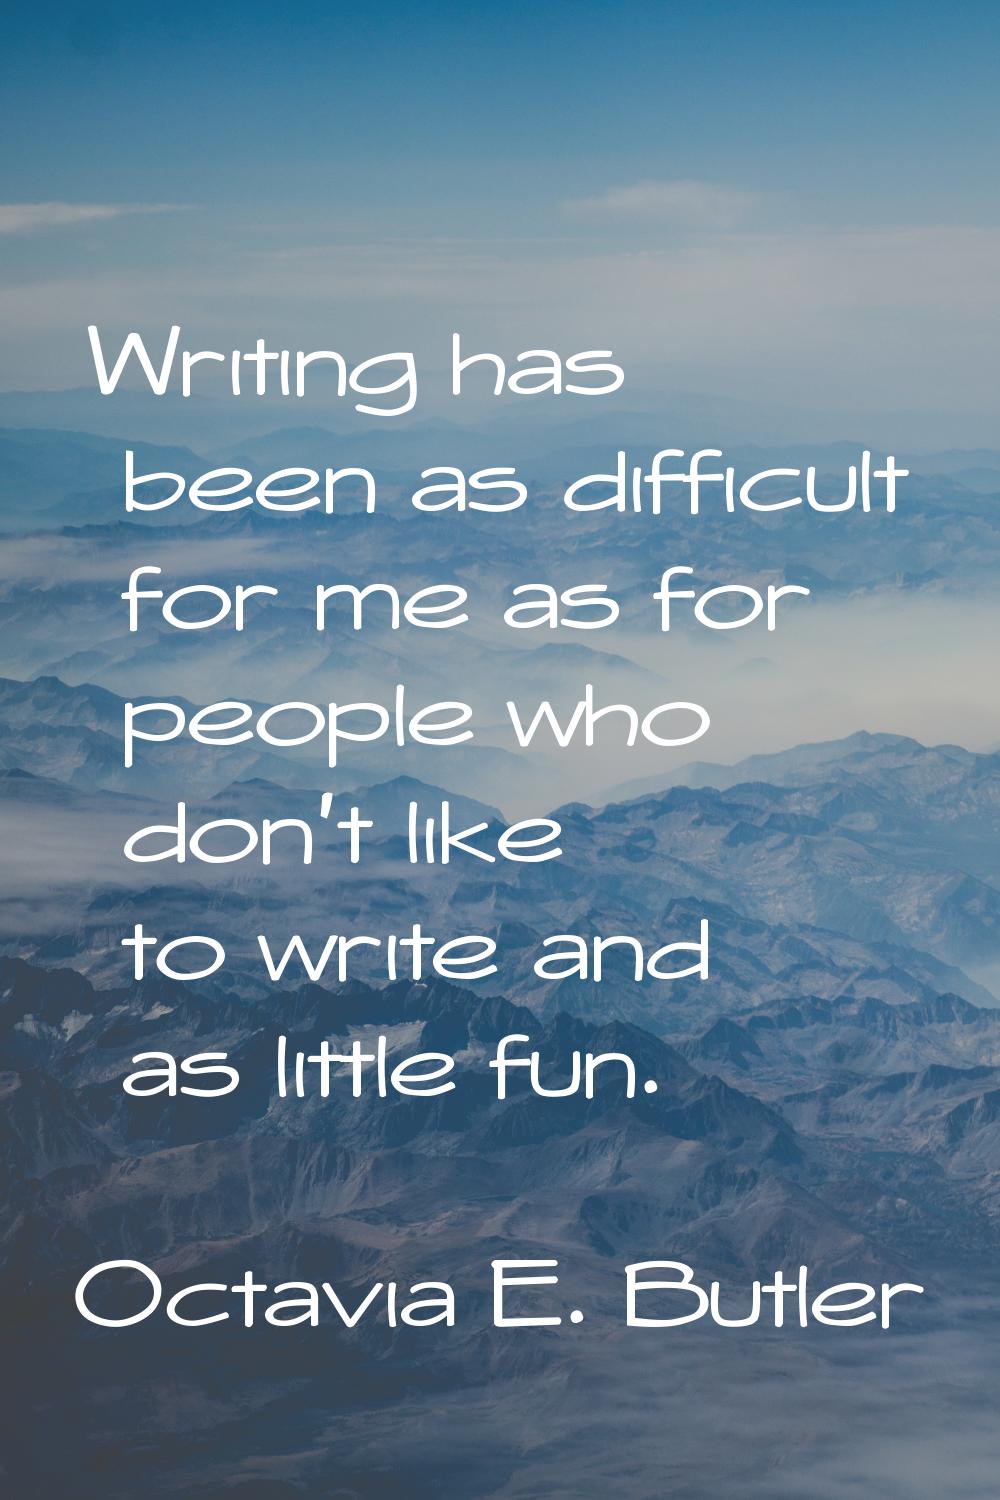 Writing has been as difficult for me as for people who don't like to write and as little fun.